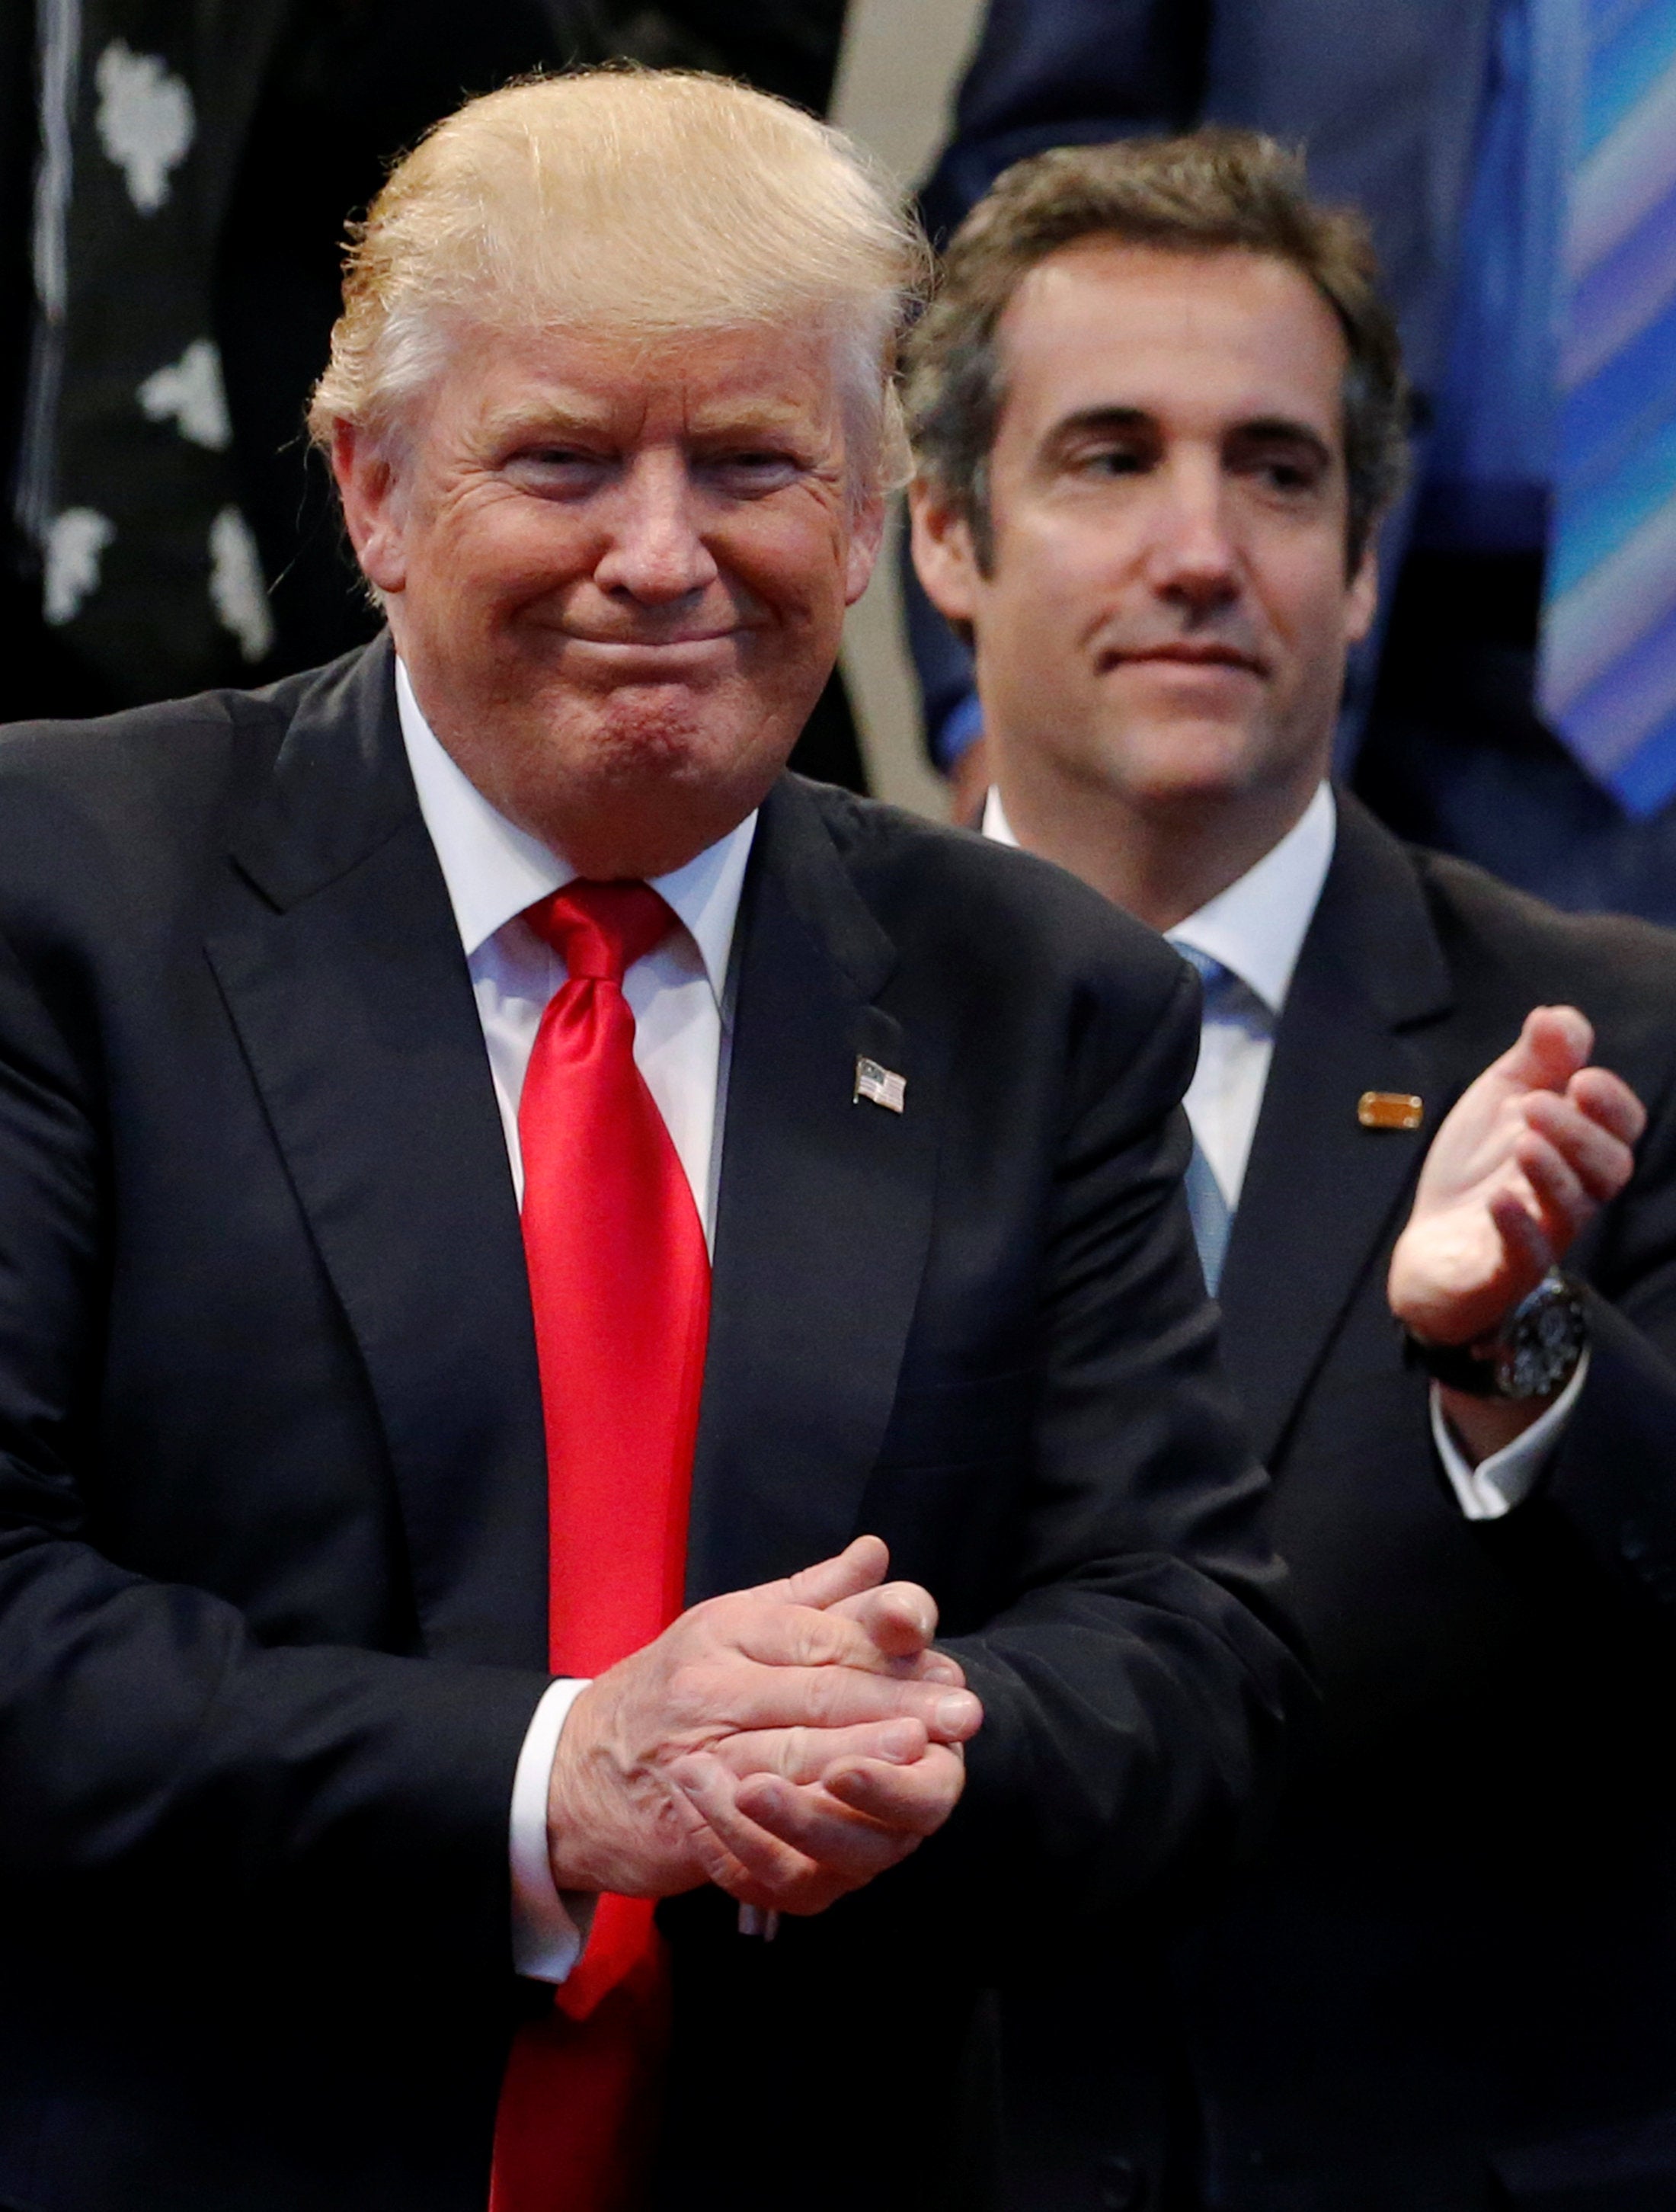 Then Republican presidential nominee Donald Trump appears with his personal attorney Michael Cohen during a campaign stop at the New Spirit Revival Center church in Cleveland Heights, Ohio, U.S. September 21, 2016.